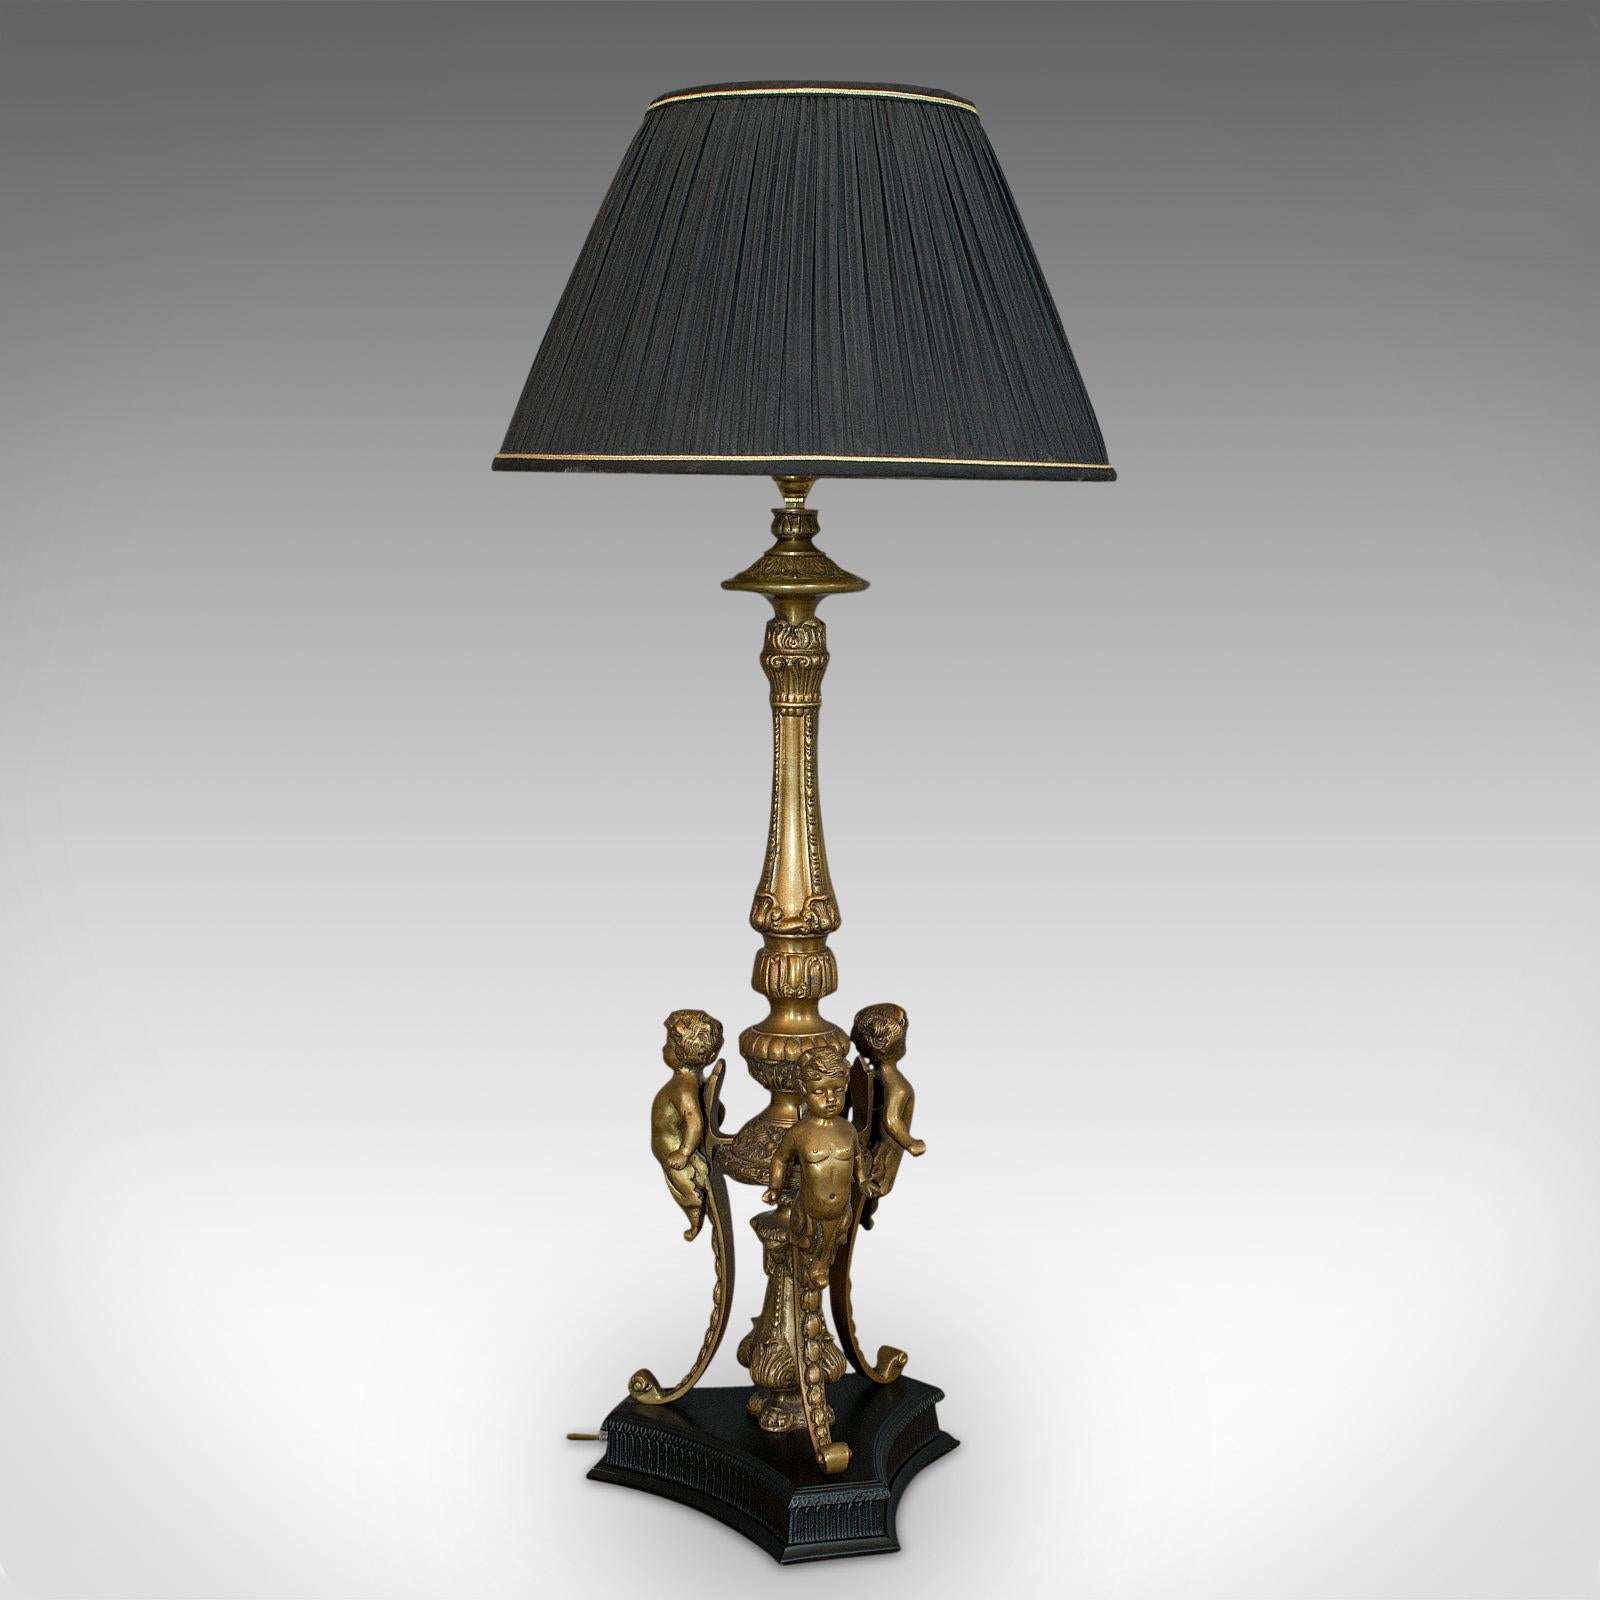 This is a table lamp. An English, gilt metal cherubic light, dating to the late 20th century, circa 1990.

Attractive golden tones
Displays a desirable aged patina
Gilt metal in good order with fine detail
Appealing, consistent colour